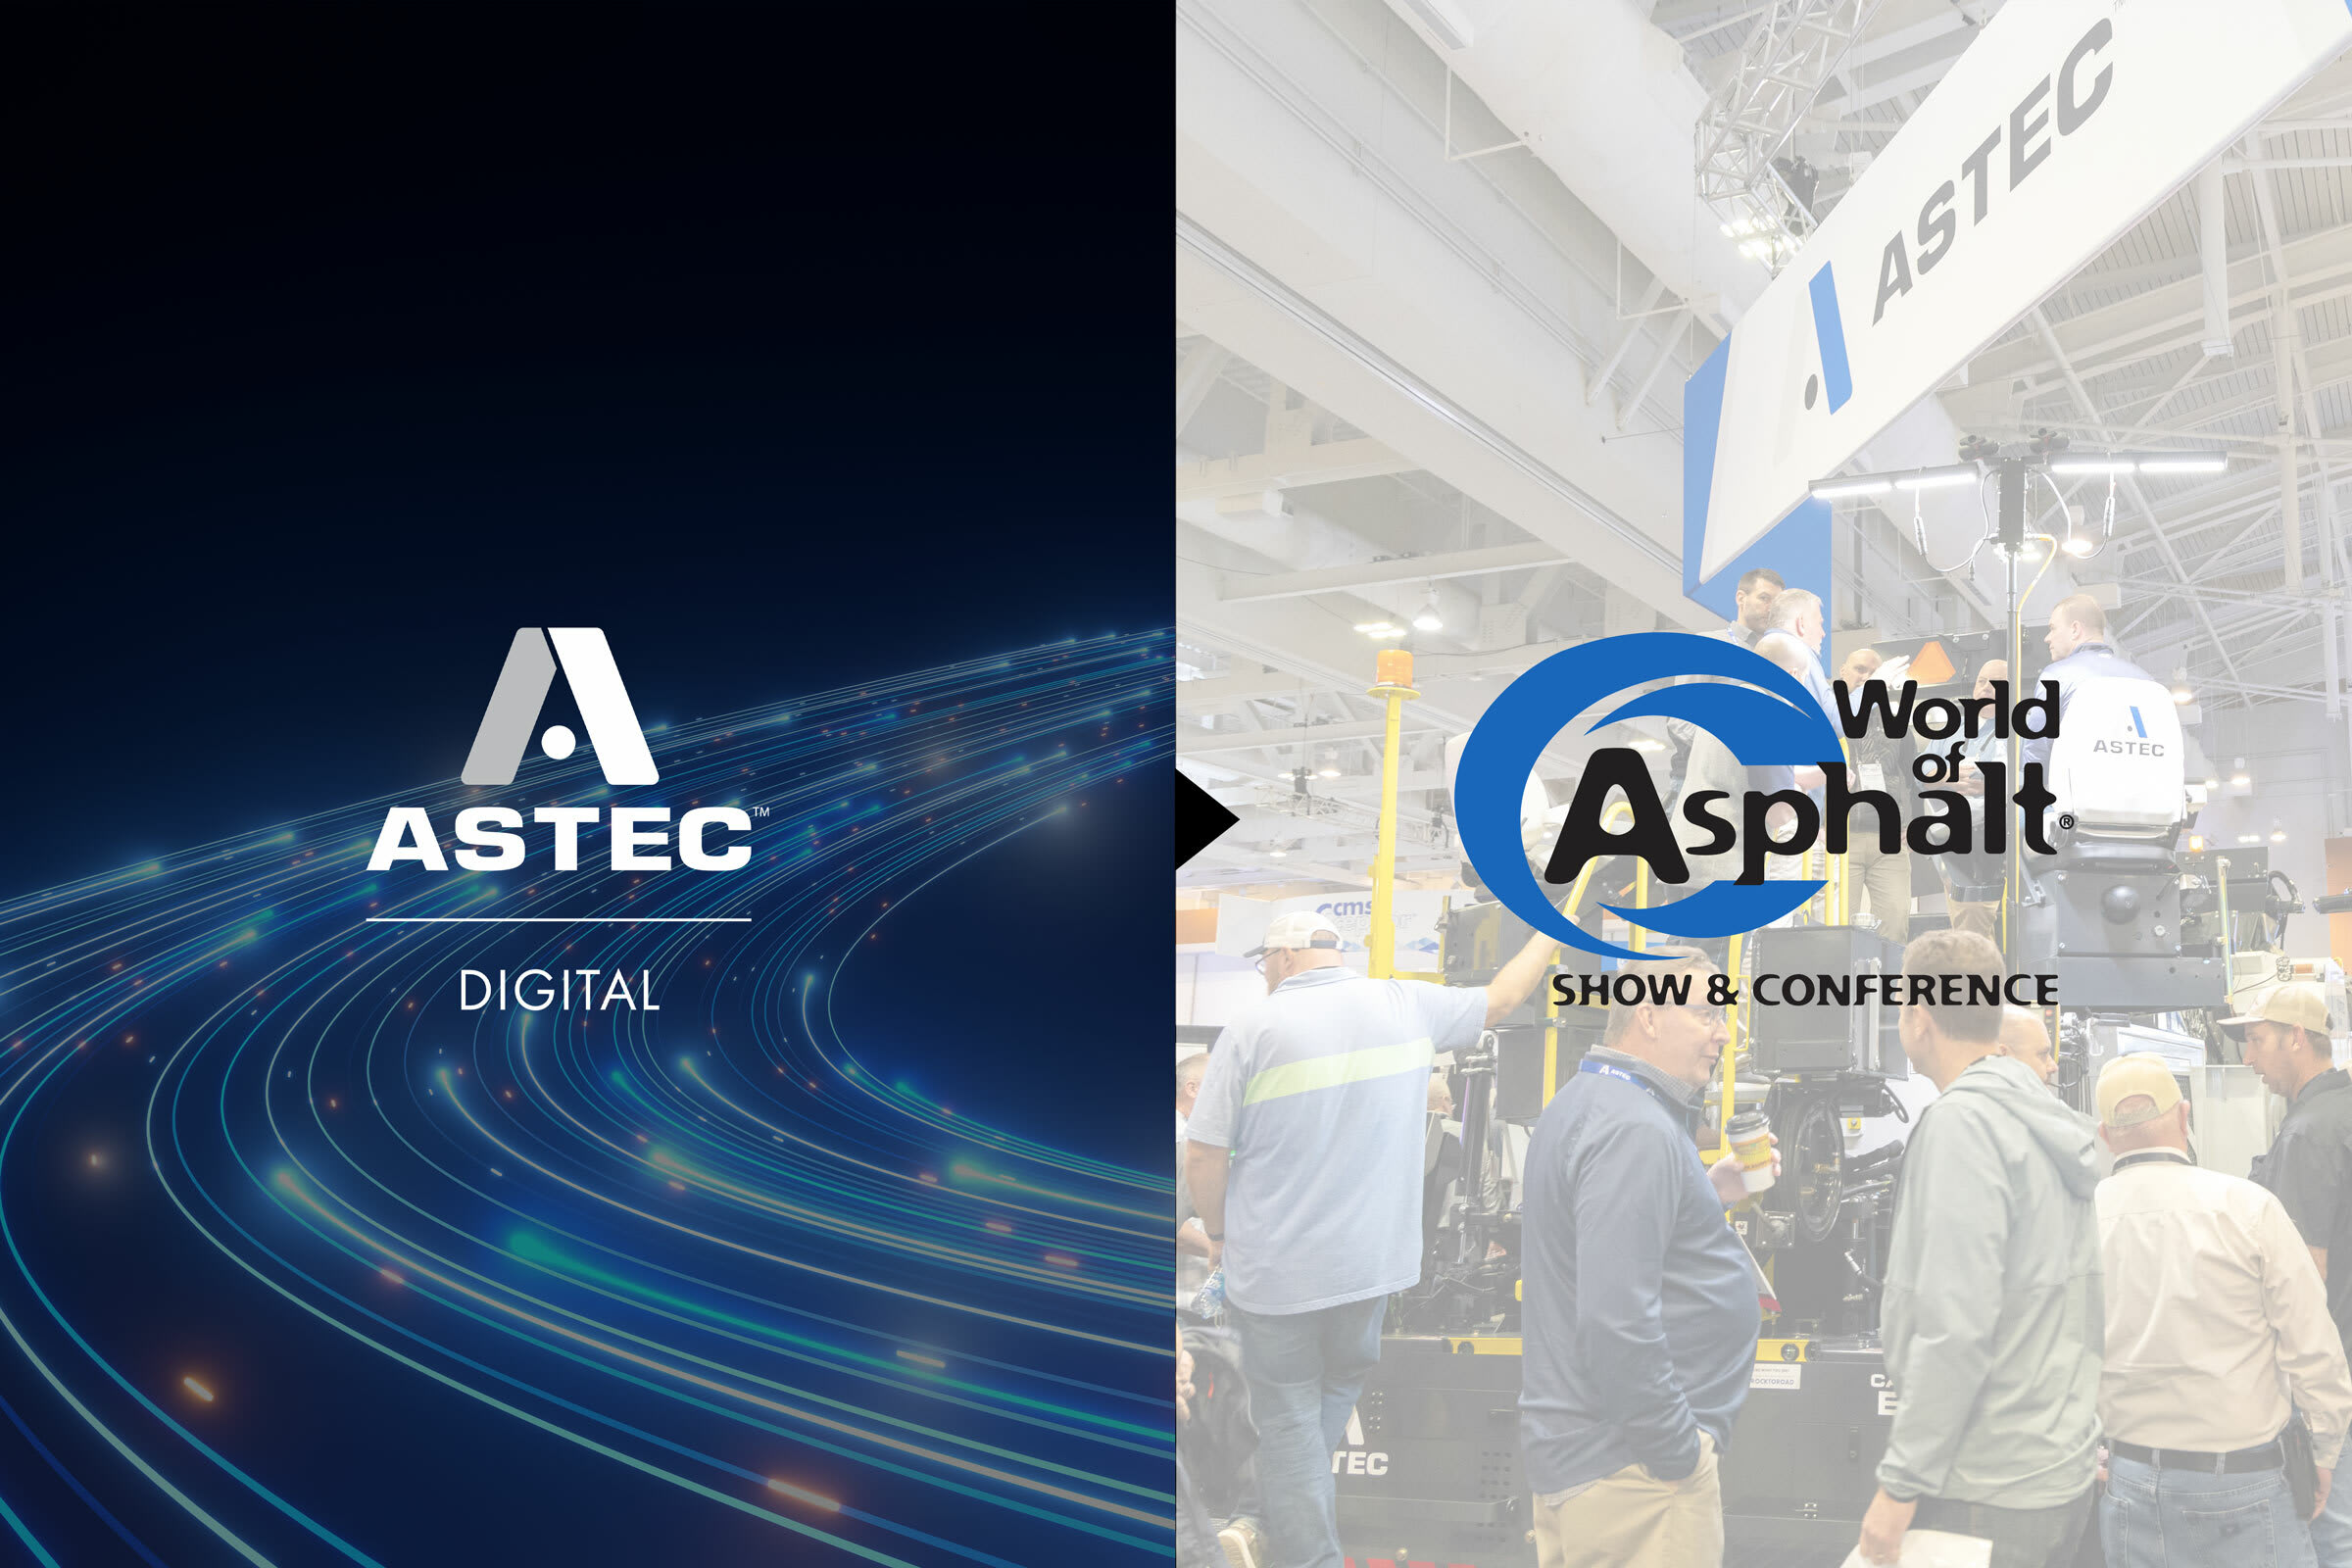 Visit ASTEC Digital at booth 1263 to learn more about our connectivity suite and recent developments in asphalt plant controls